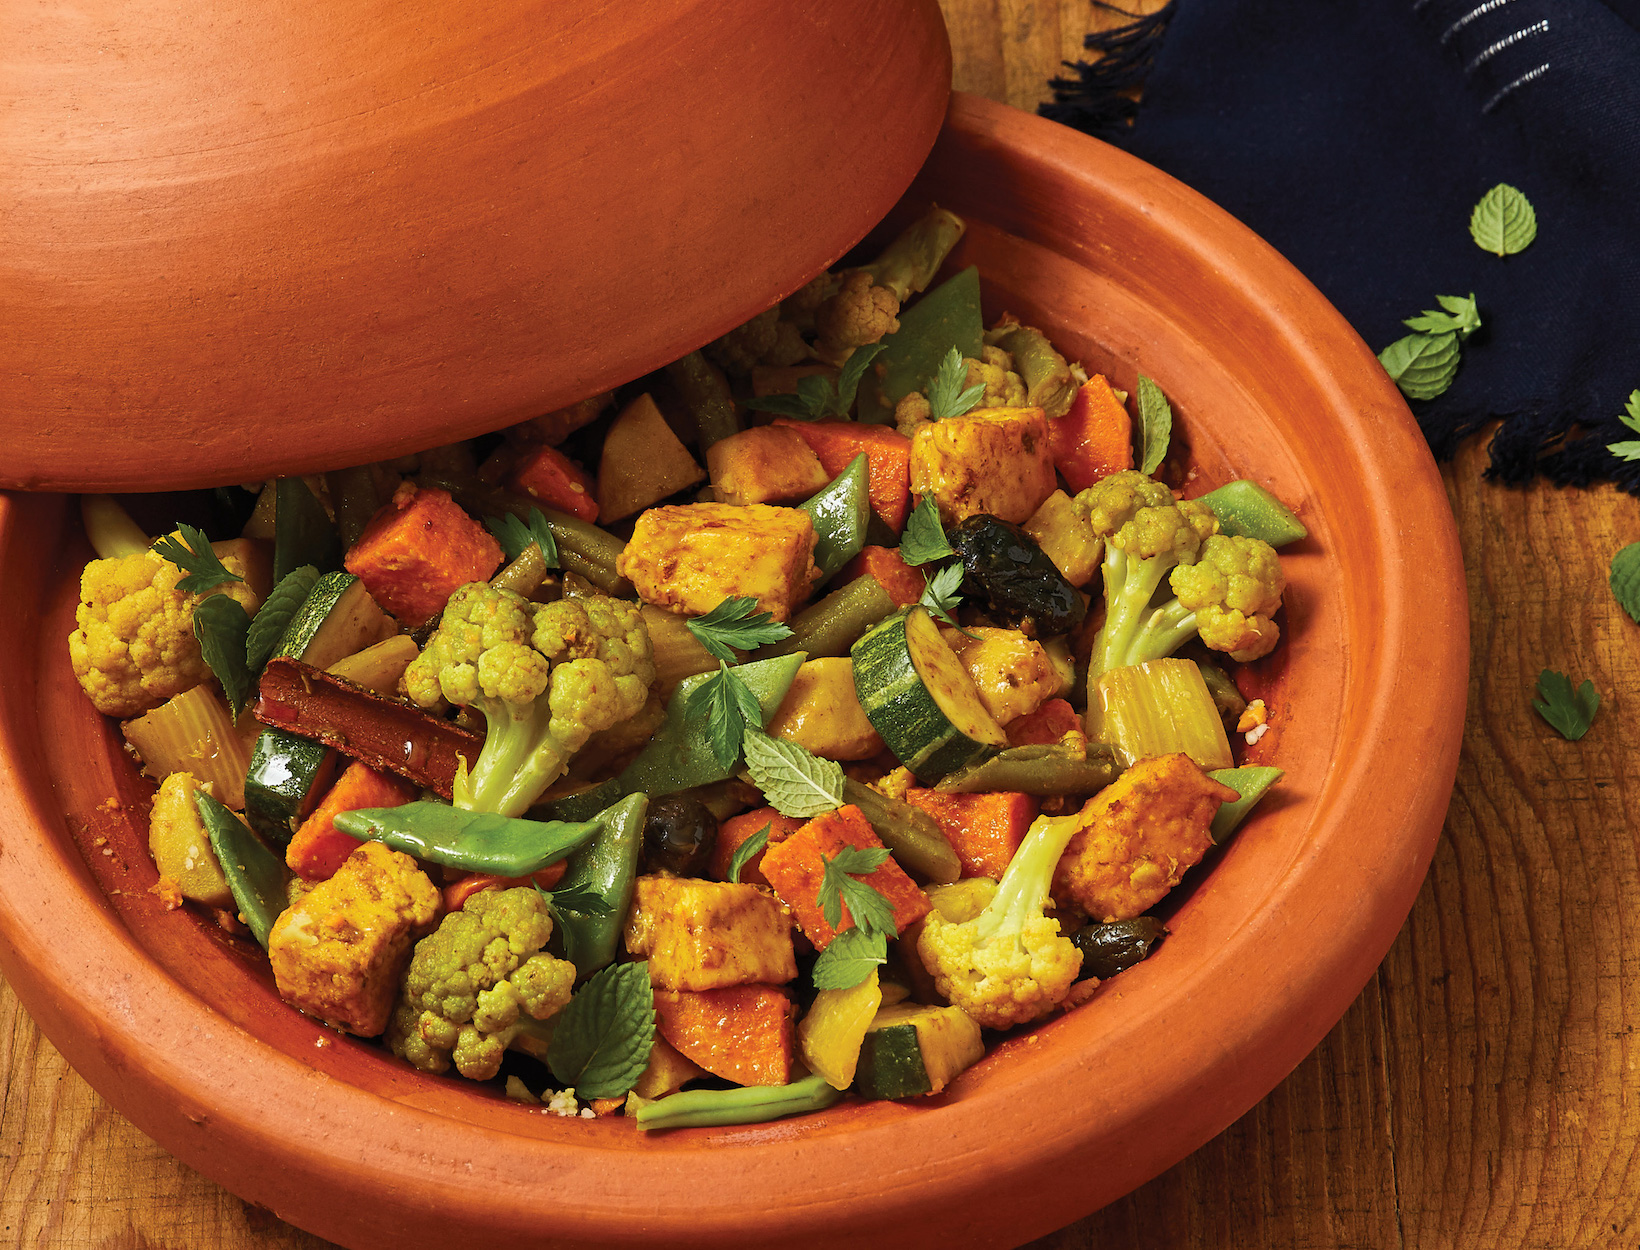 Moroccan-Style Vegetable Tagine Recipe